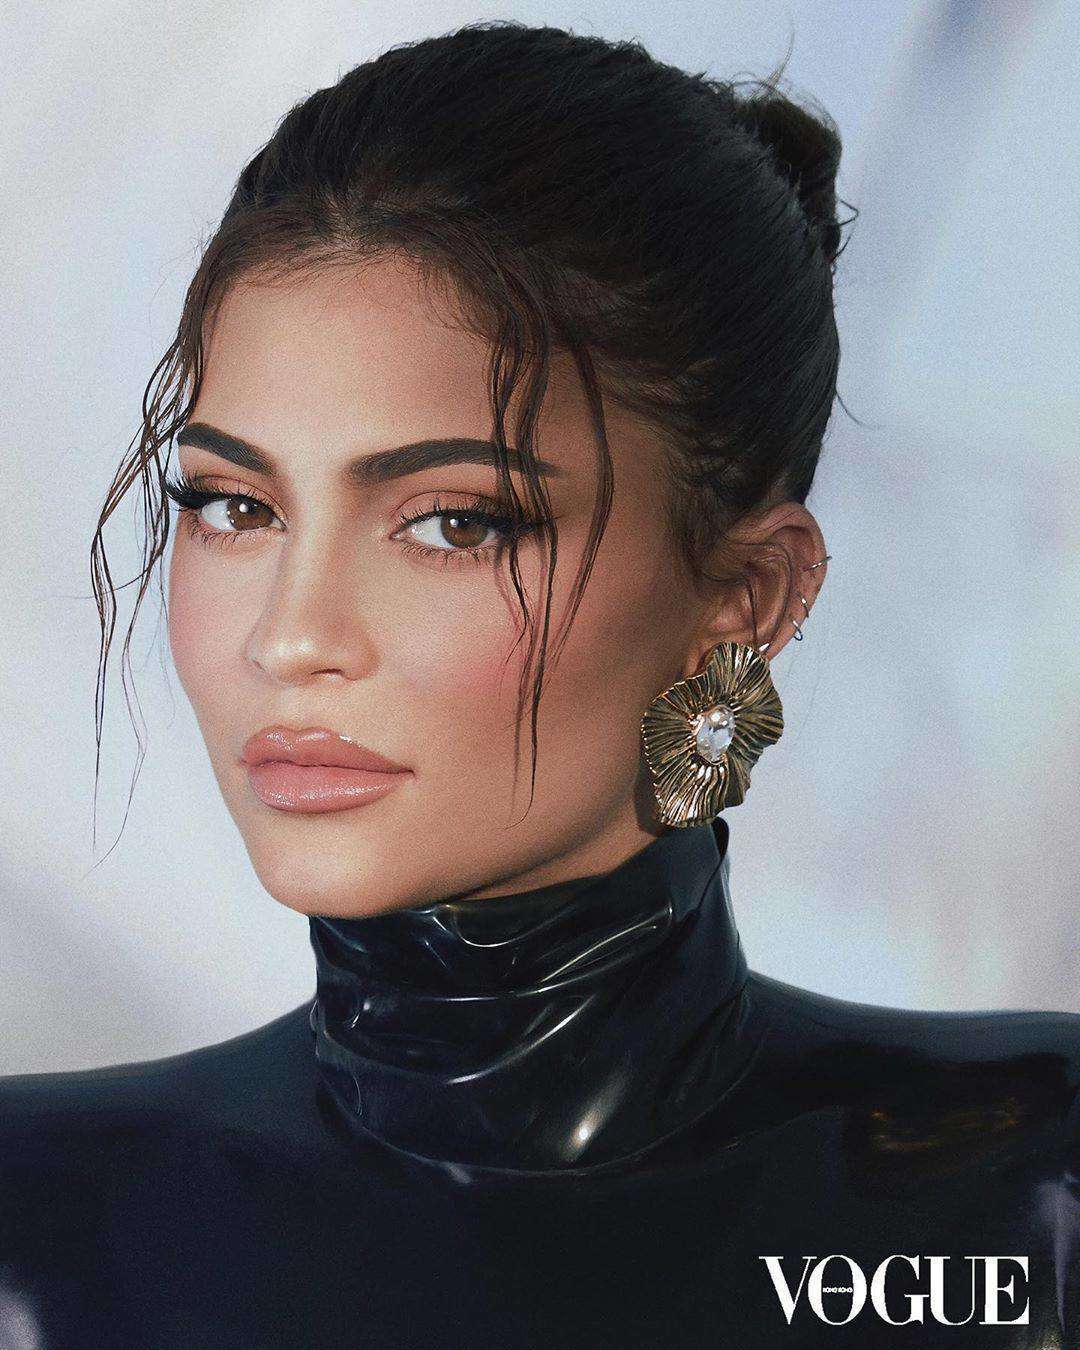 Kylie Jenner Airbrushed to Oblivion for Vogue! - Photo 1